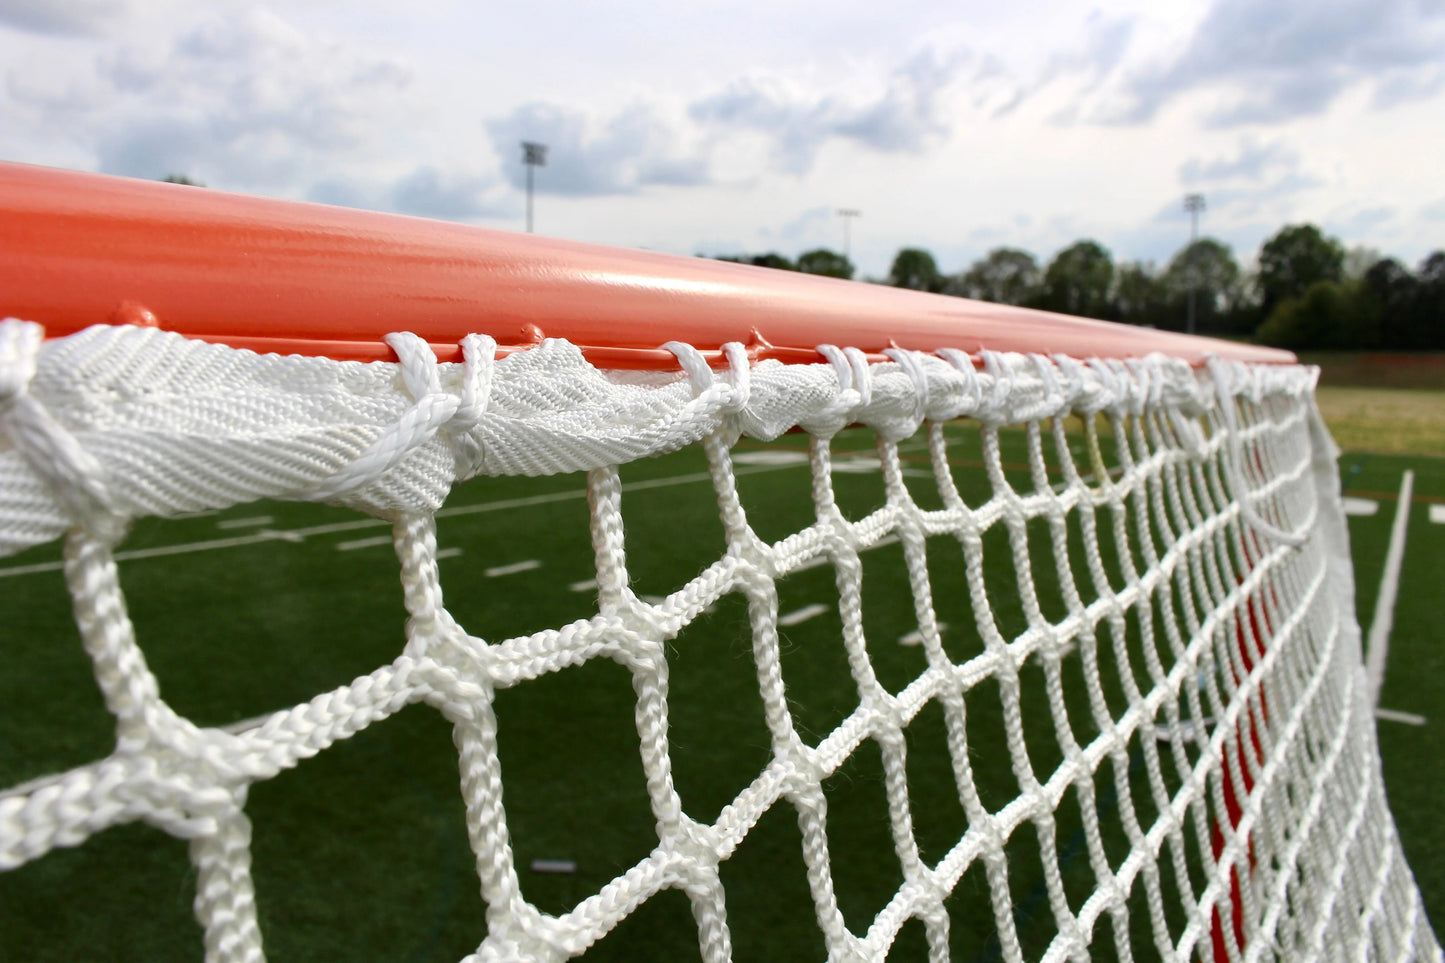 High School Practice Goal FRAME ONLY - 50 lbs, 6'x6'x7', Posts w/ Lacing Rails by Crankshooter® - NET SOLD SEPARATELY - Free Shipping - #1 Selling Goal